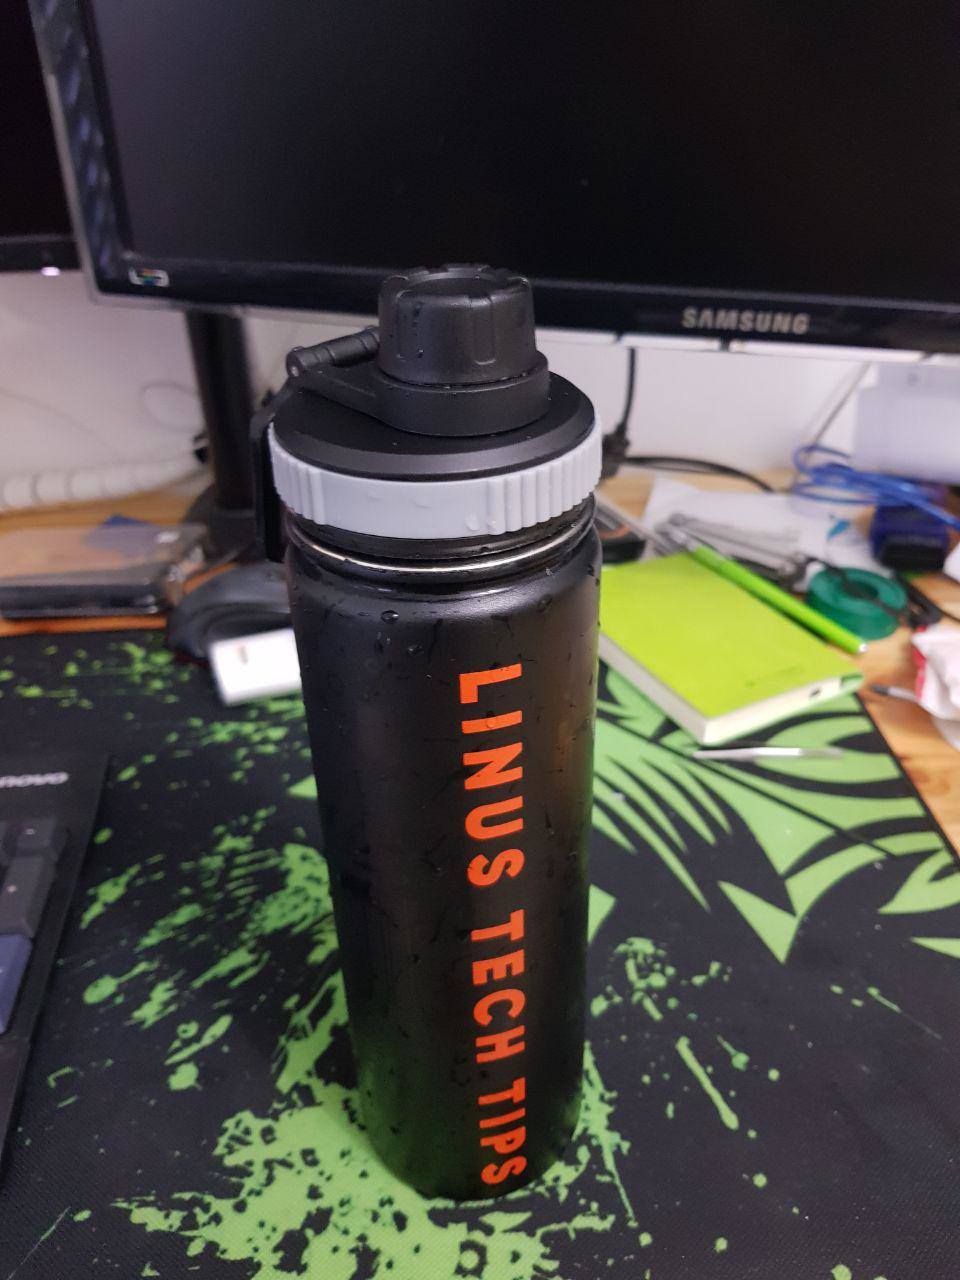 Where can I get a replacement seal for the ltt water bottle? (Sorry for  potato pic quality) : r/LinusTechTips